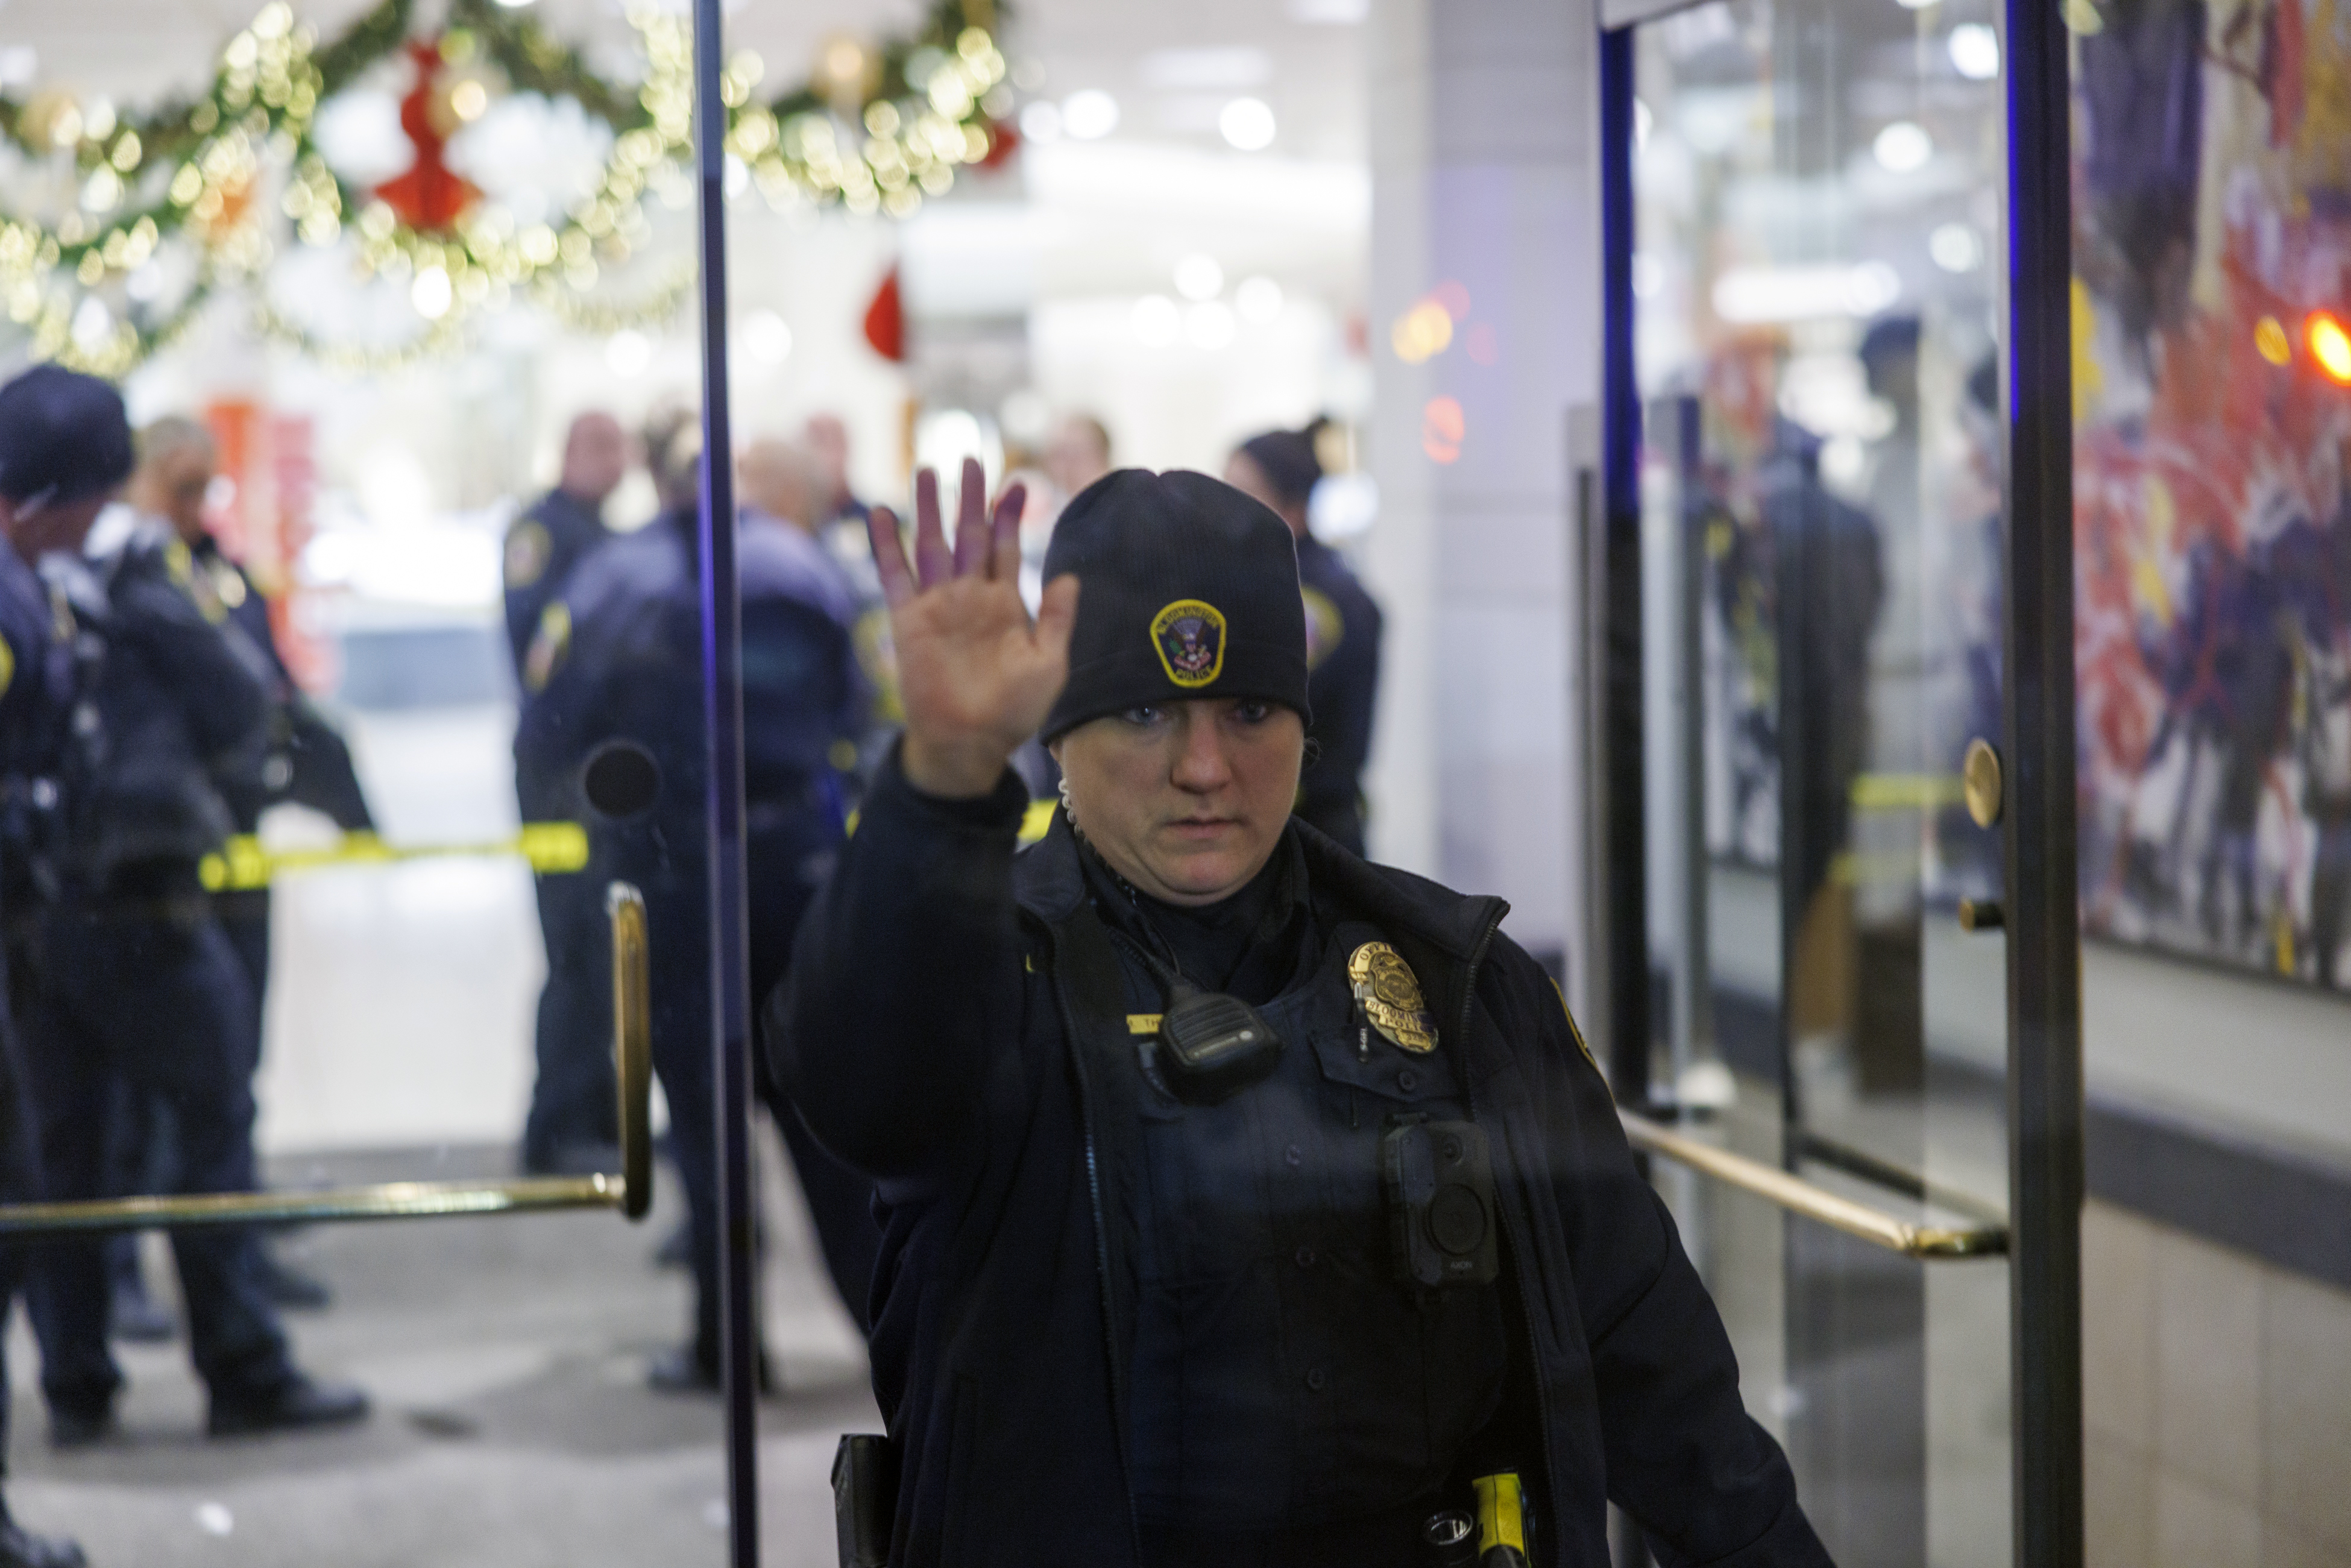 Mall of America tests 'weapons detection system' after shooting